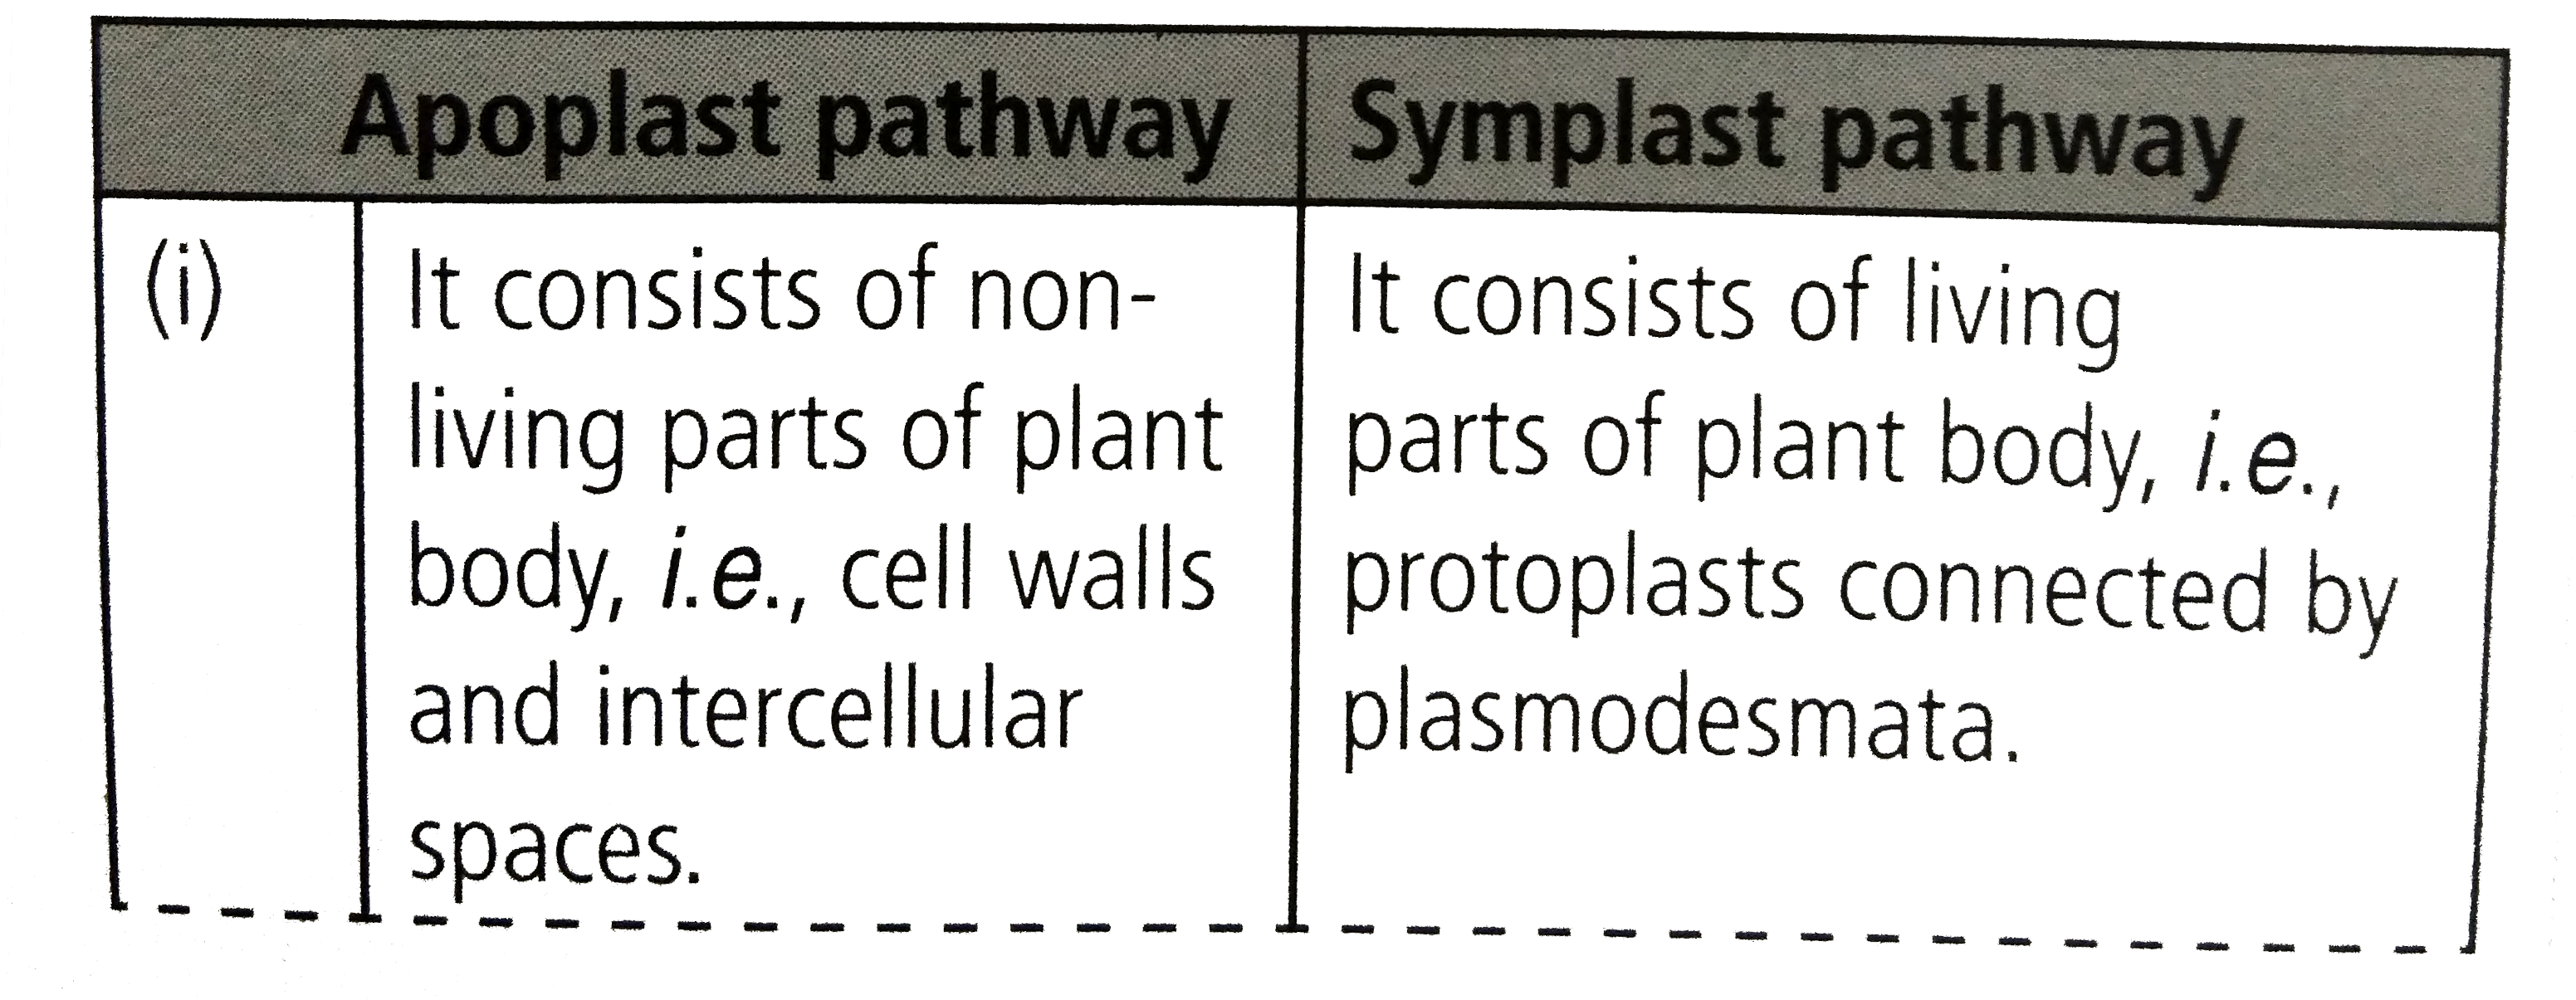 Following are the differences between apoplast pathway and symplast pathway.